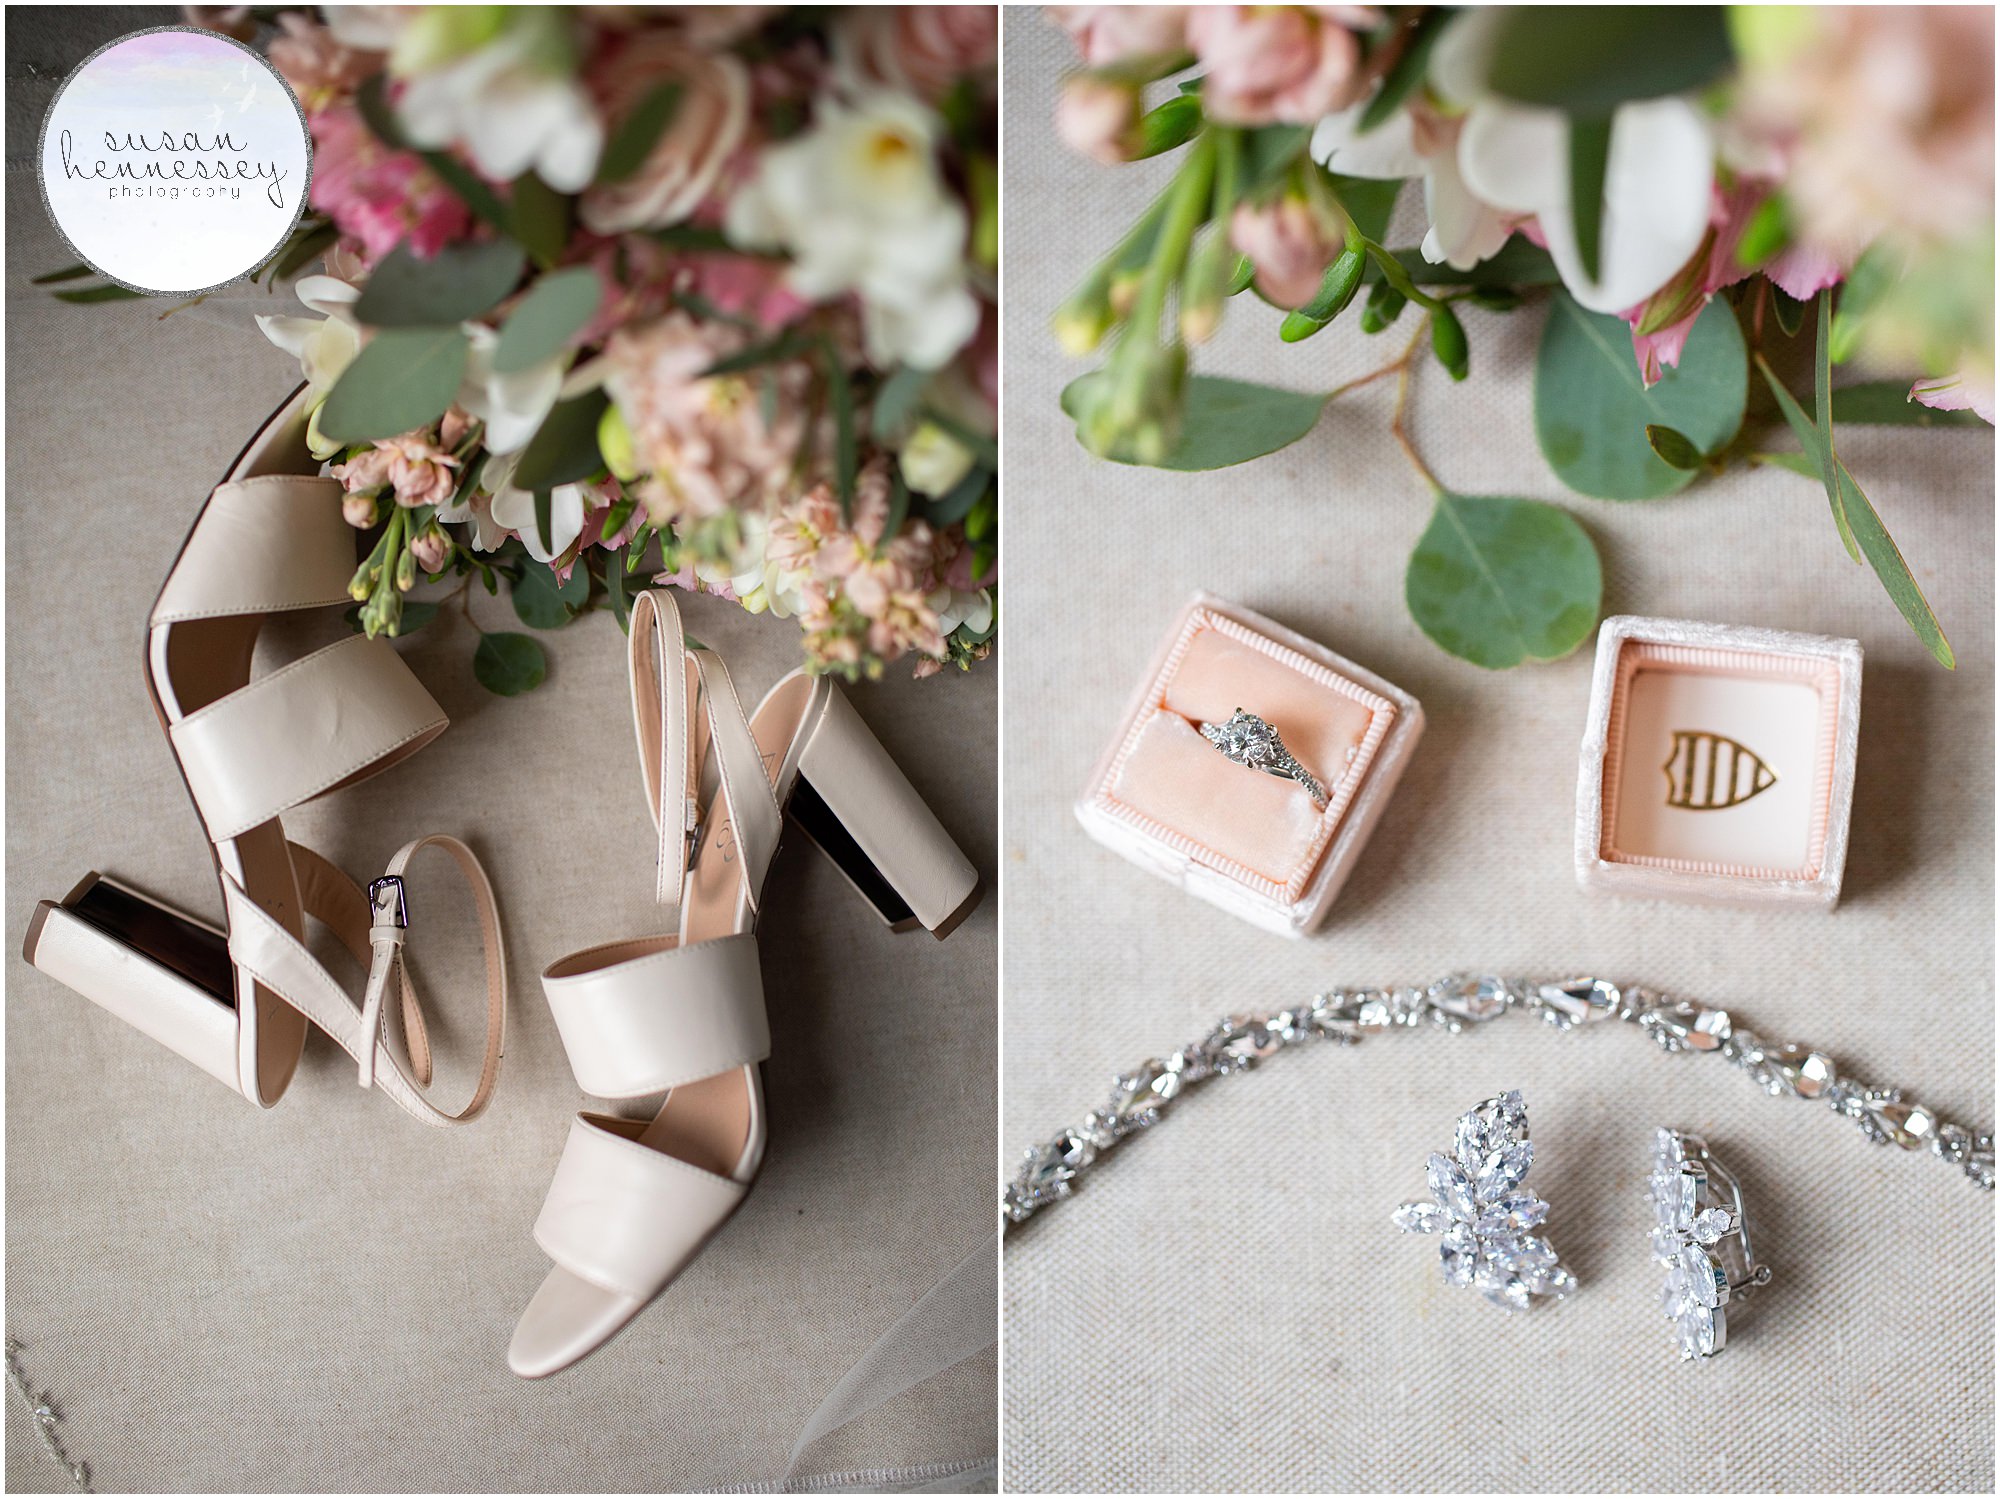 Detail photo of bride's shoes, bouquet, engagement ring in ring box, bracelet and earrings. 